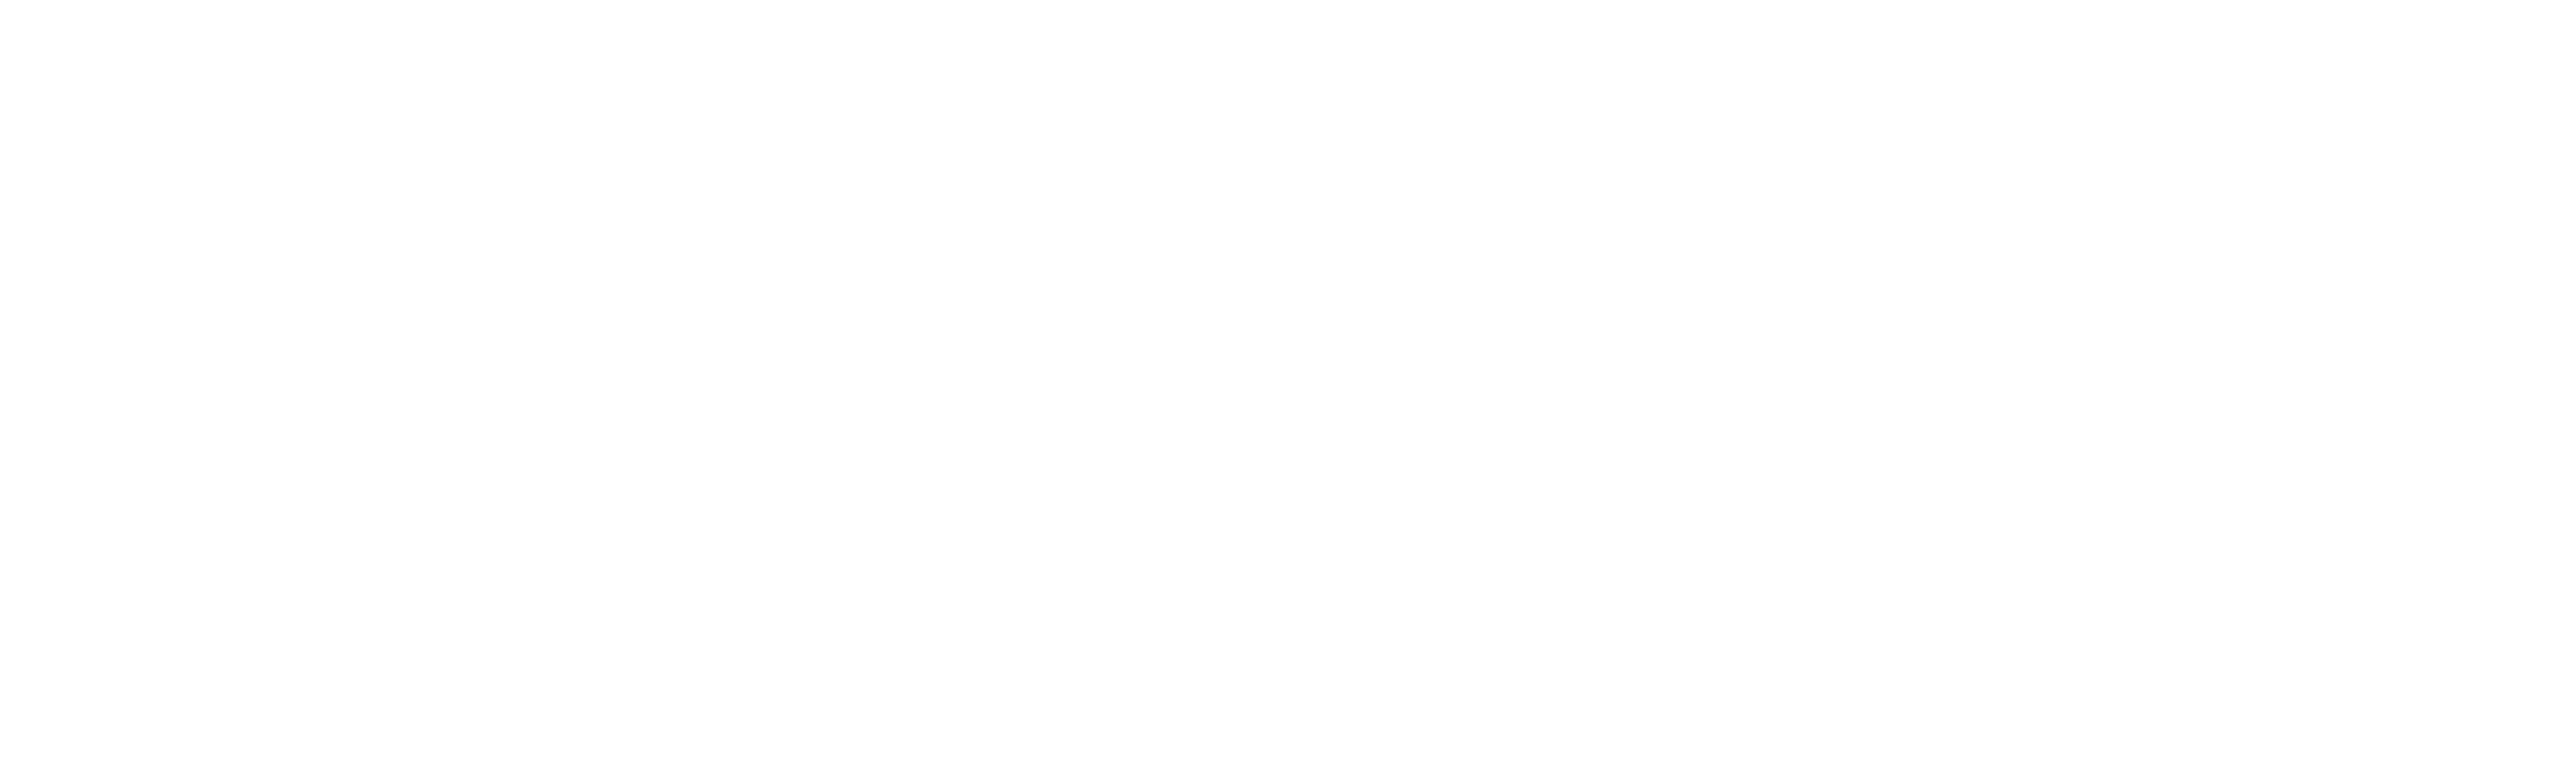 FourScouts